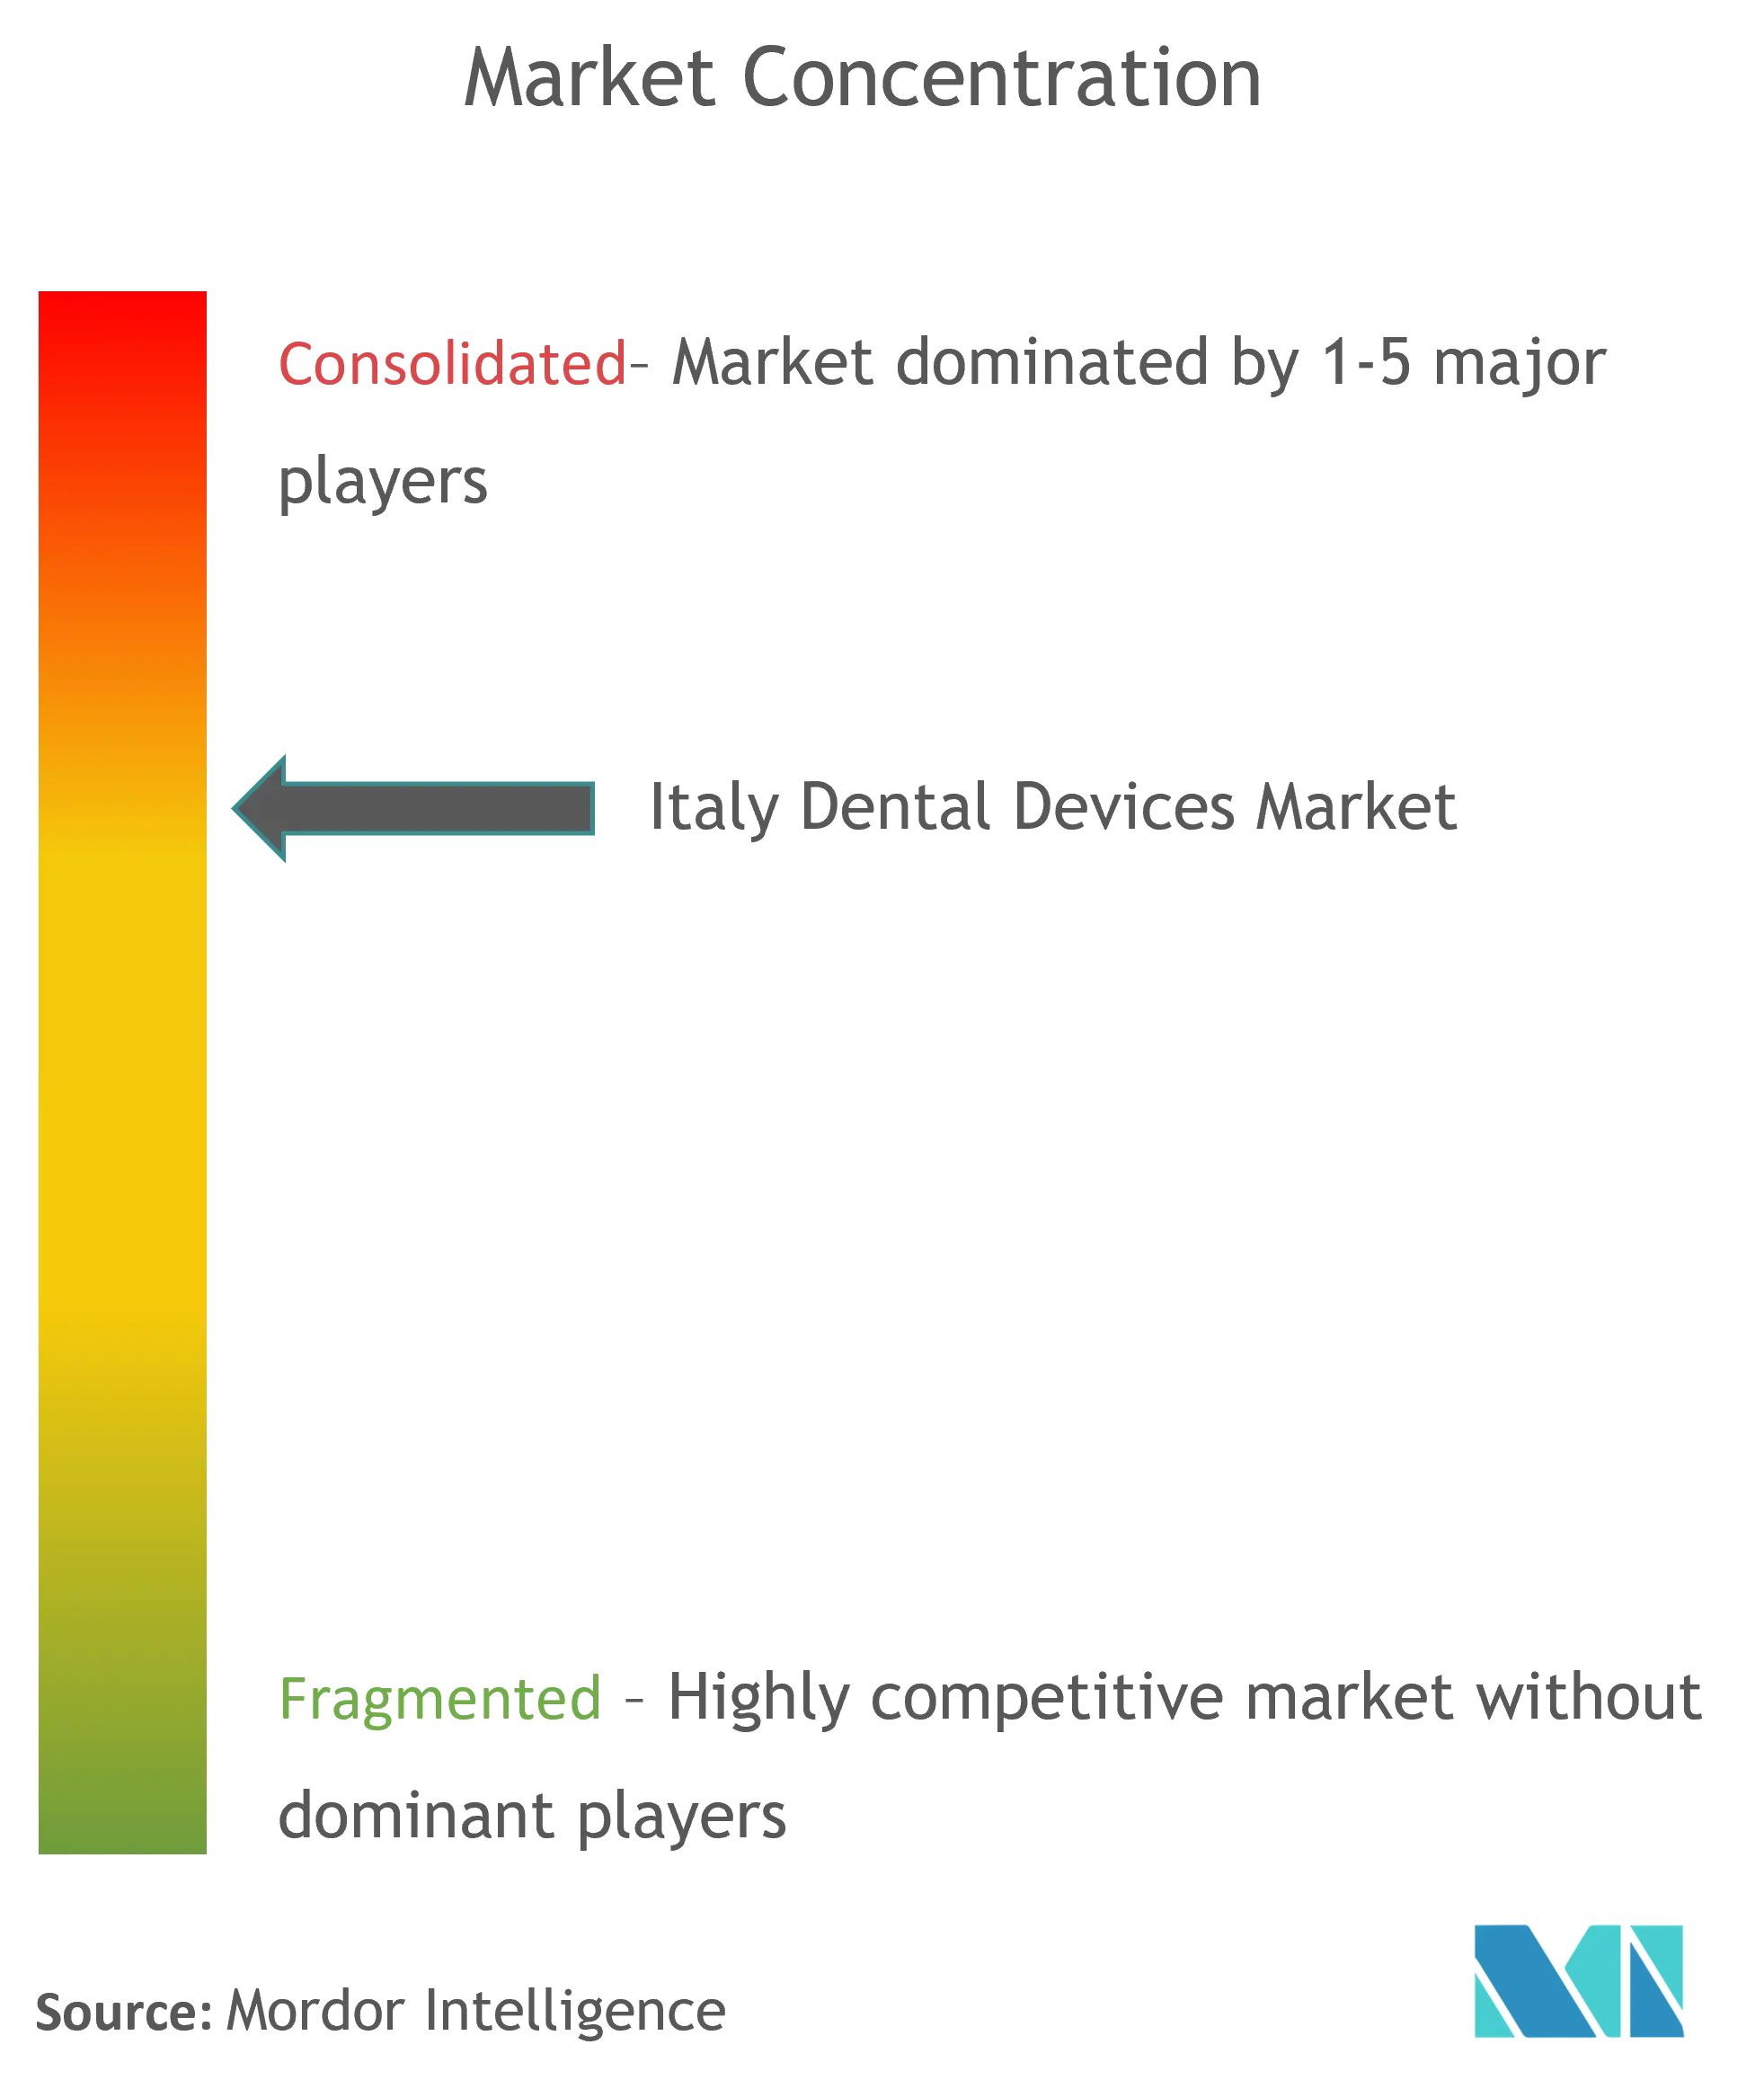 Italy Dental Devices Market Concentration